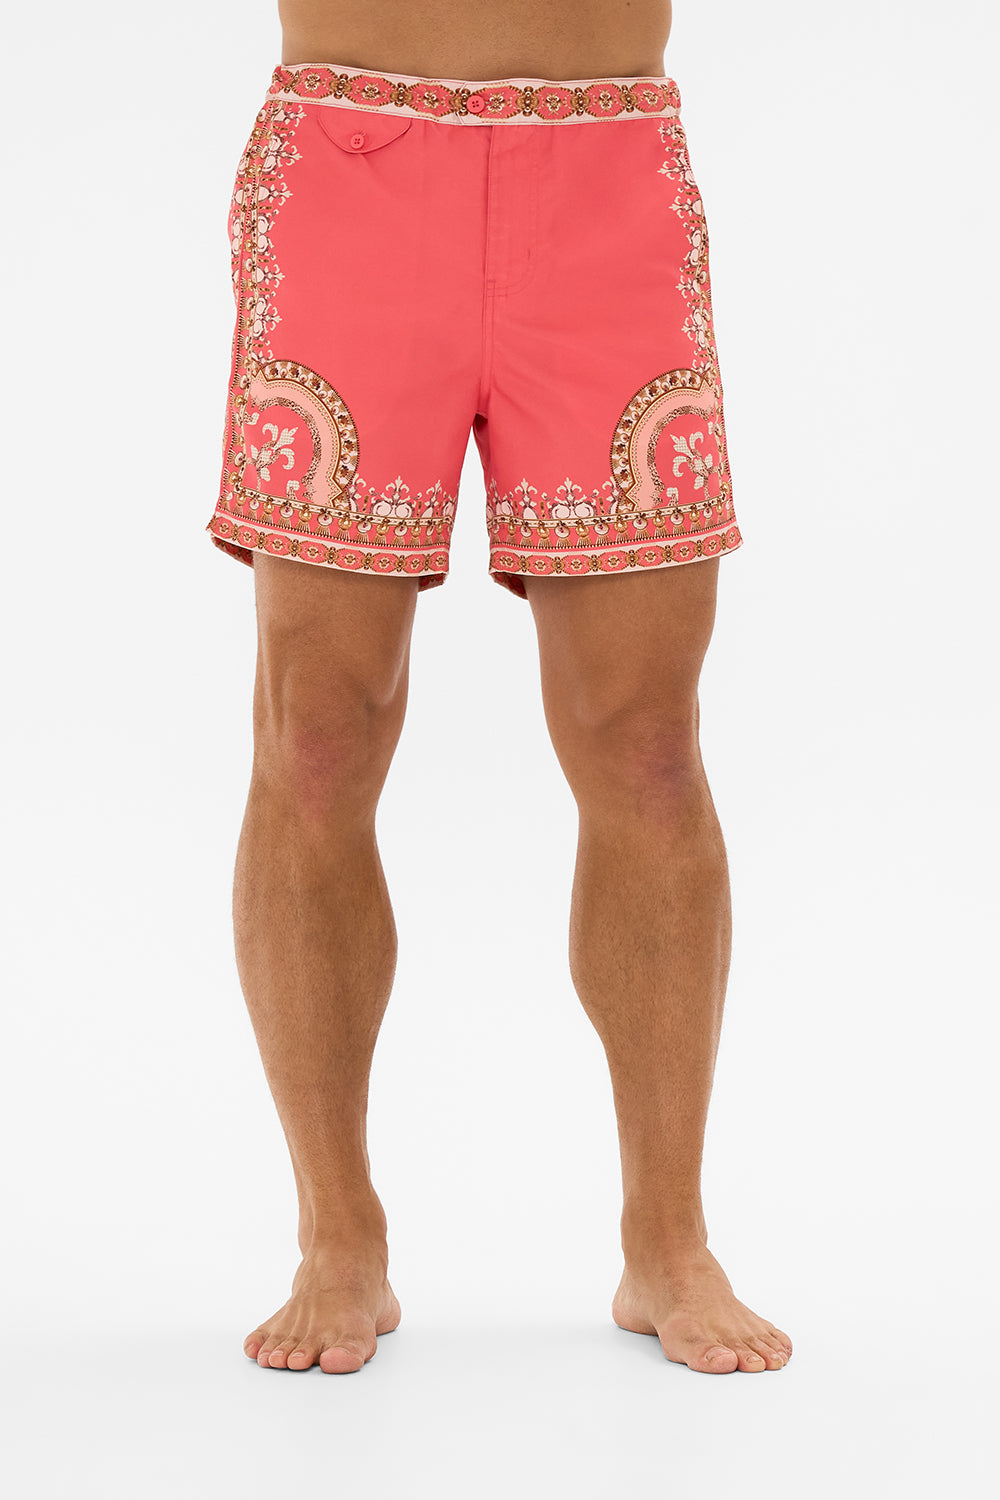 CAMILLA pink tailored swim short in Shell Games